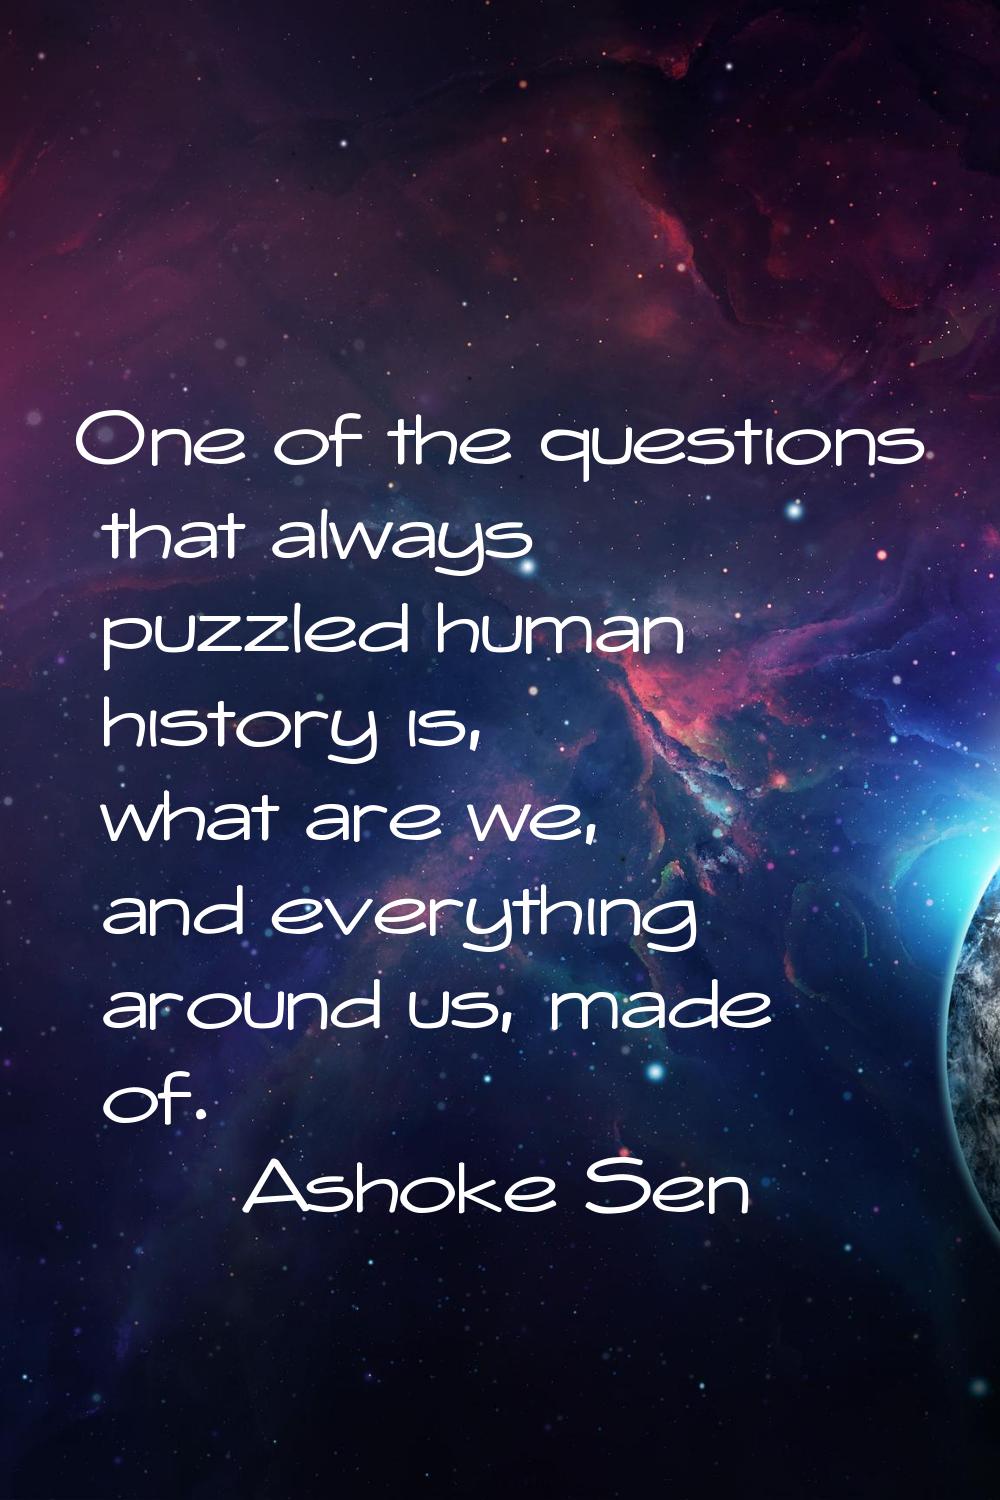 One of the questions that always puzzled human history is, what are we, and everything around us, m